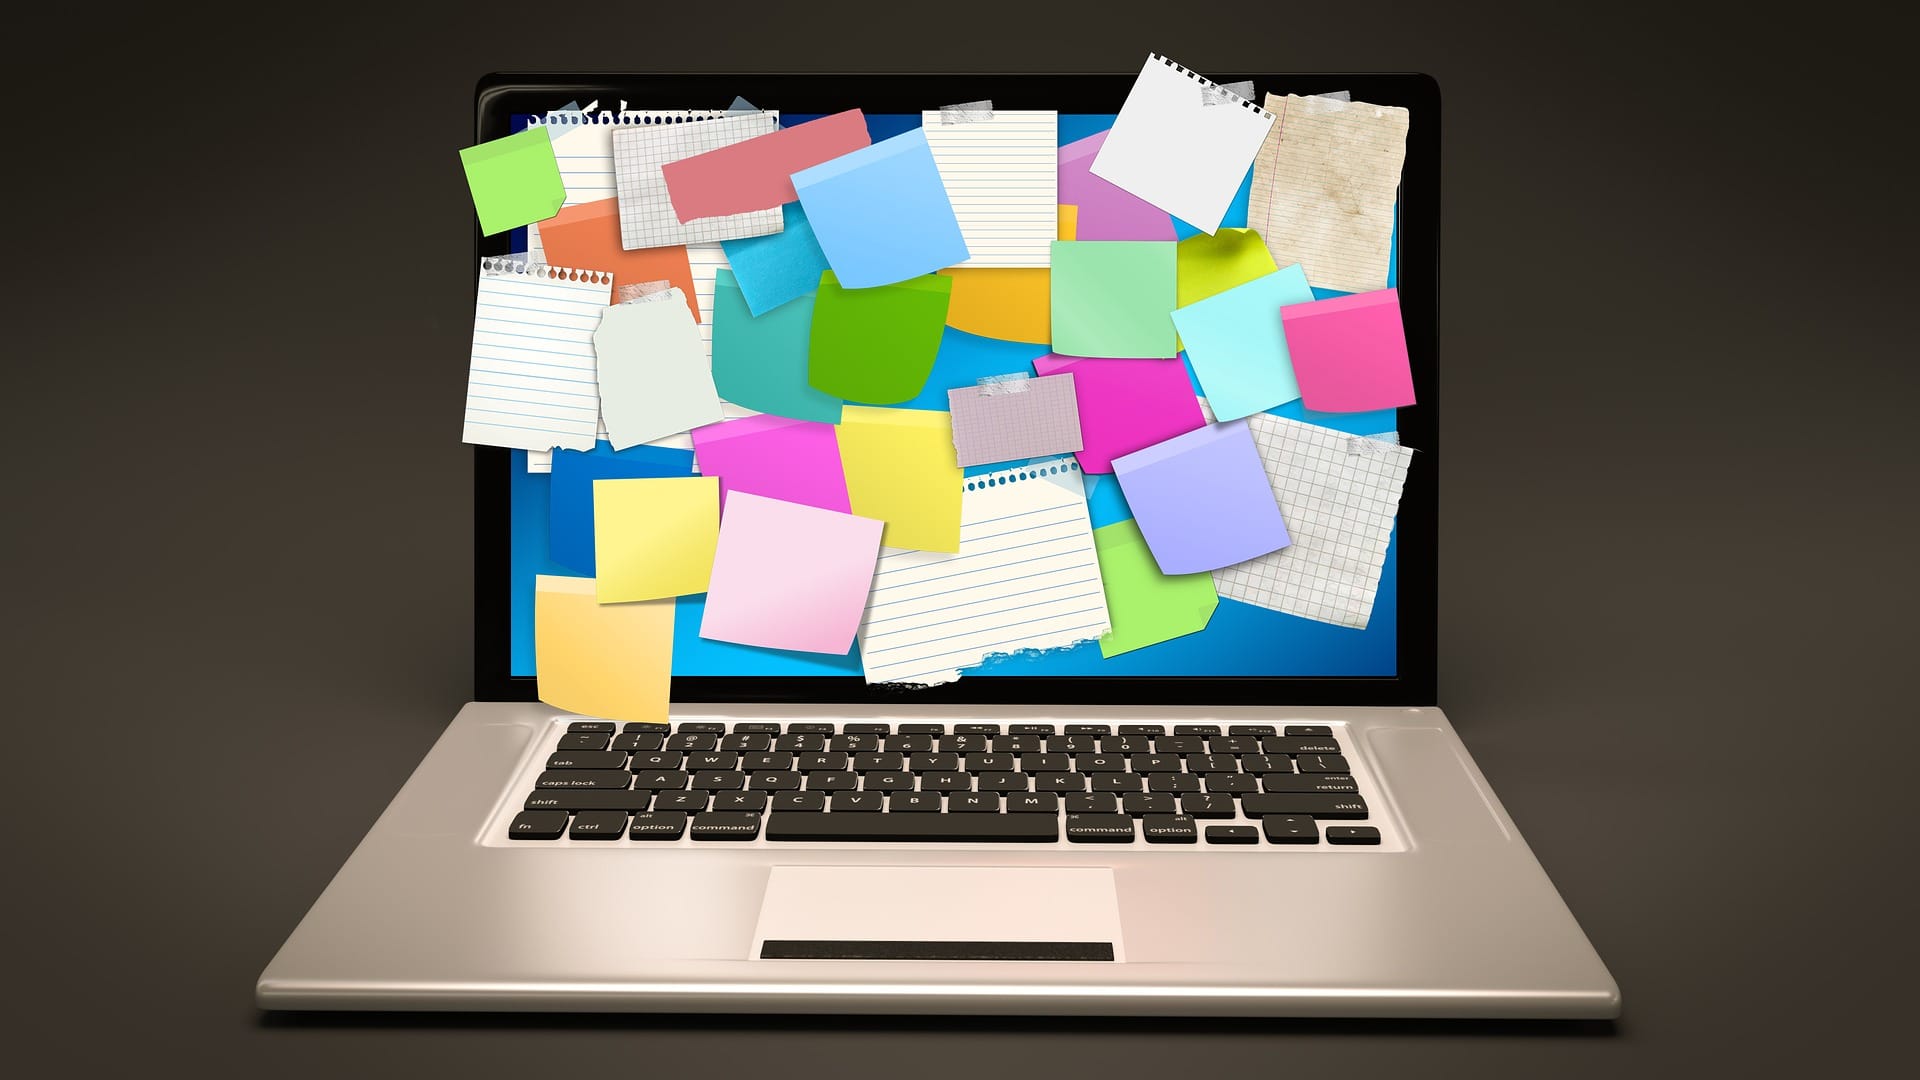 Sticky notes covering a laptop screen